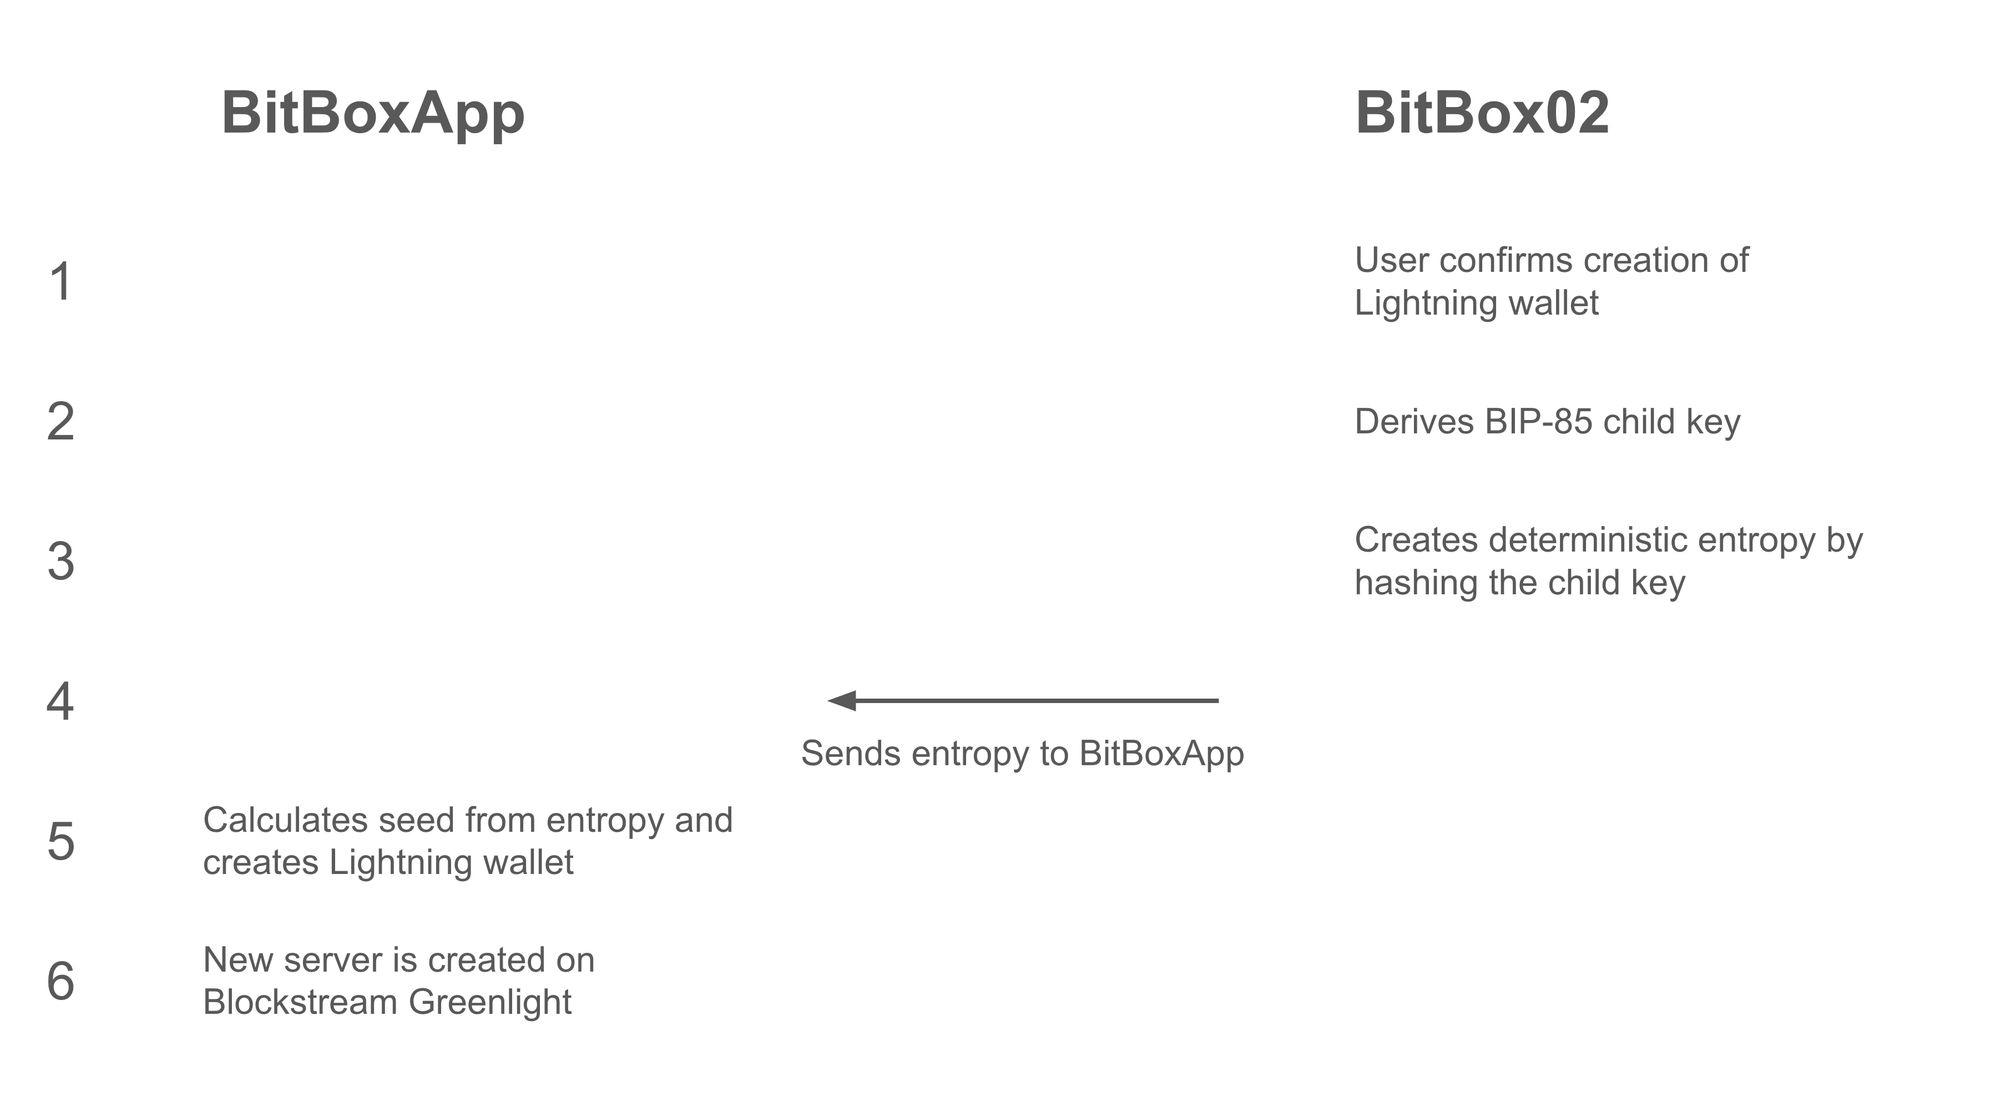 How the BitBox02 securely derives the seed for the Lightning wallet in the BitBoxApp